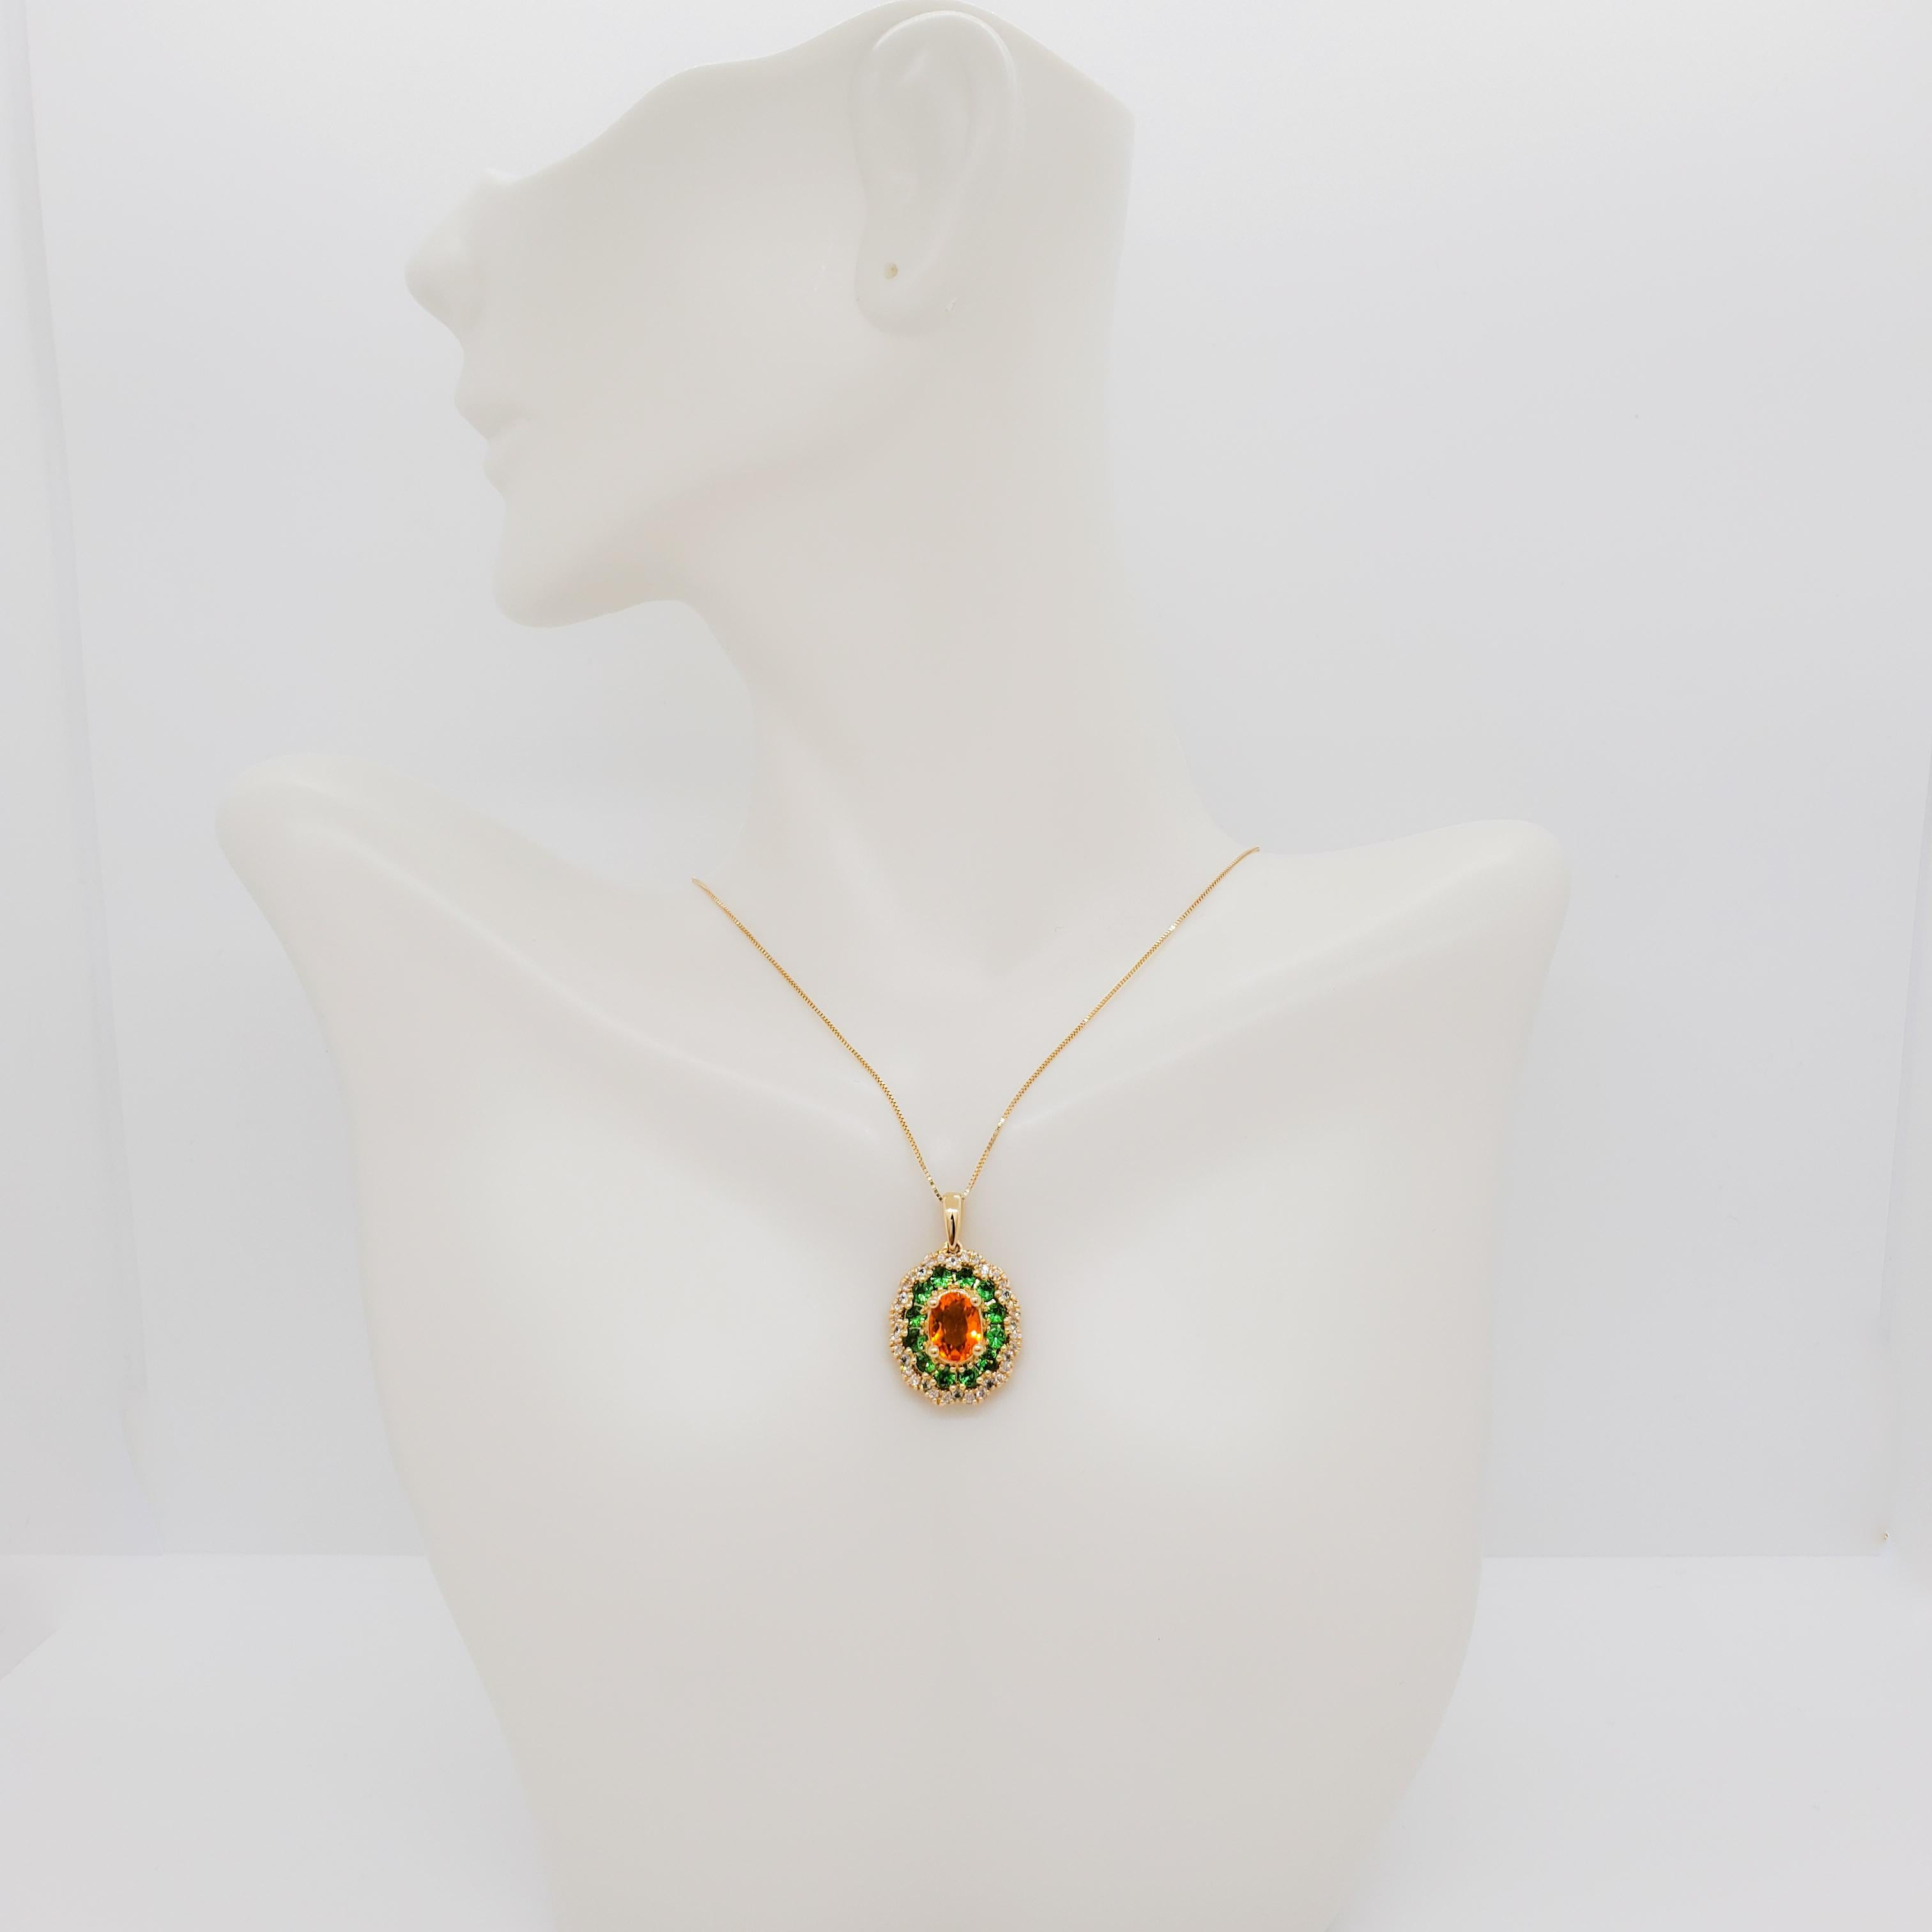 Gorgeous pendant necklace with 1.73 ct. of multi color oval and round topaz and garnets and white diamonds. Handmade in 14k yellow gold.  Chain is 18